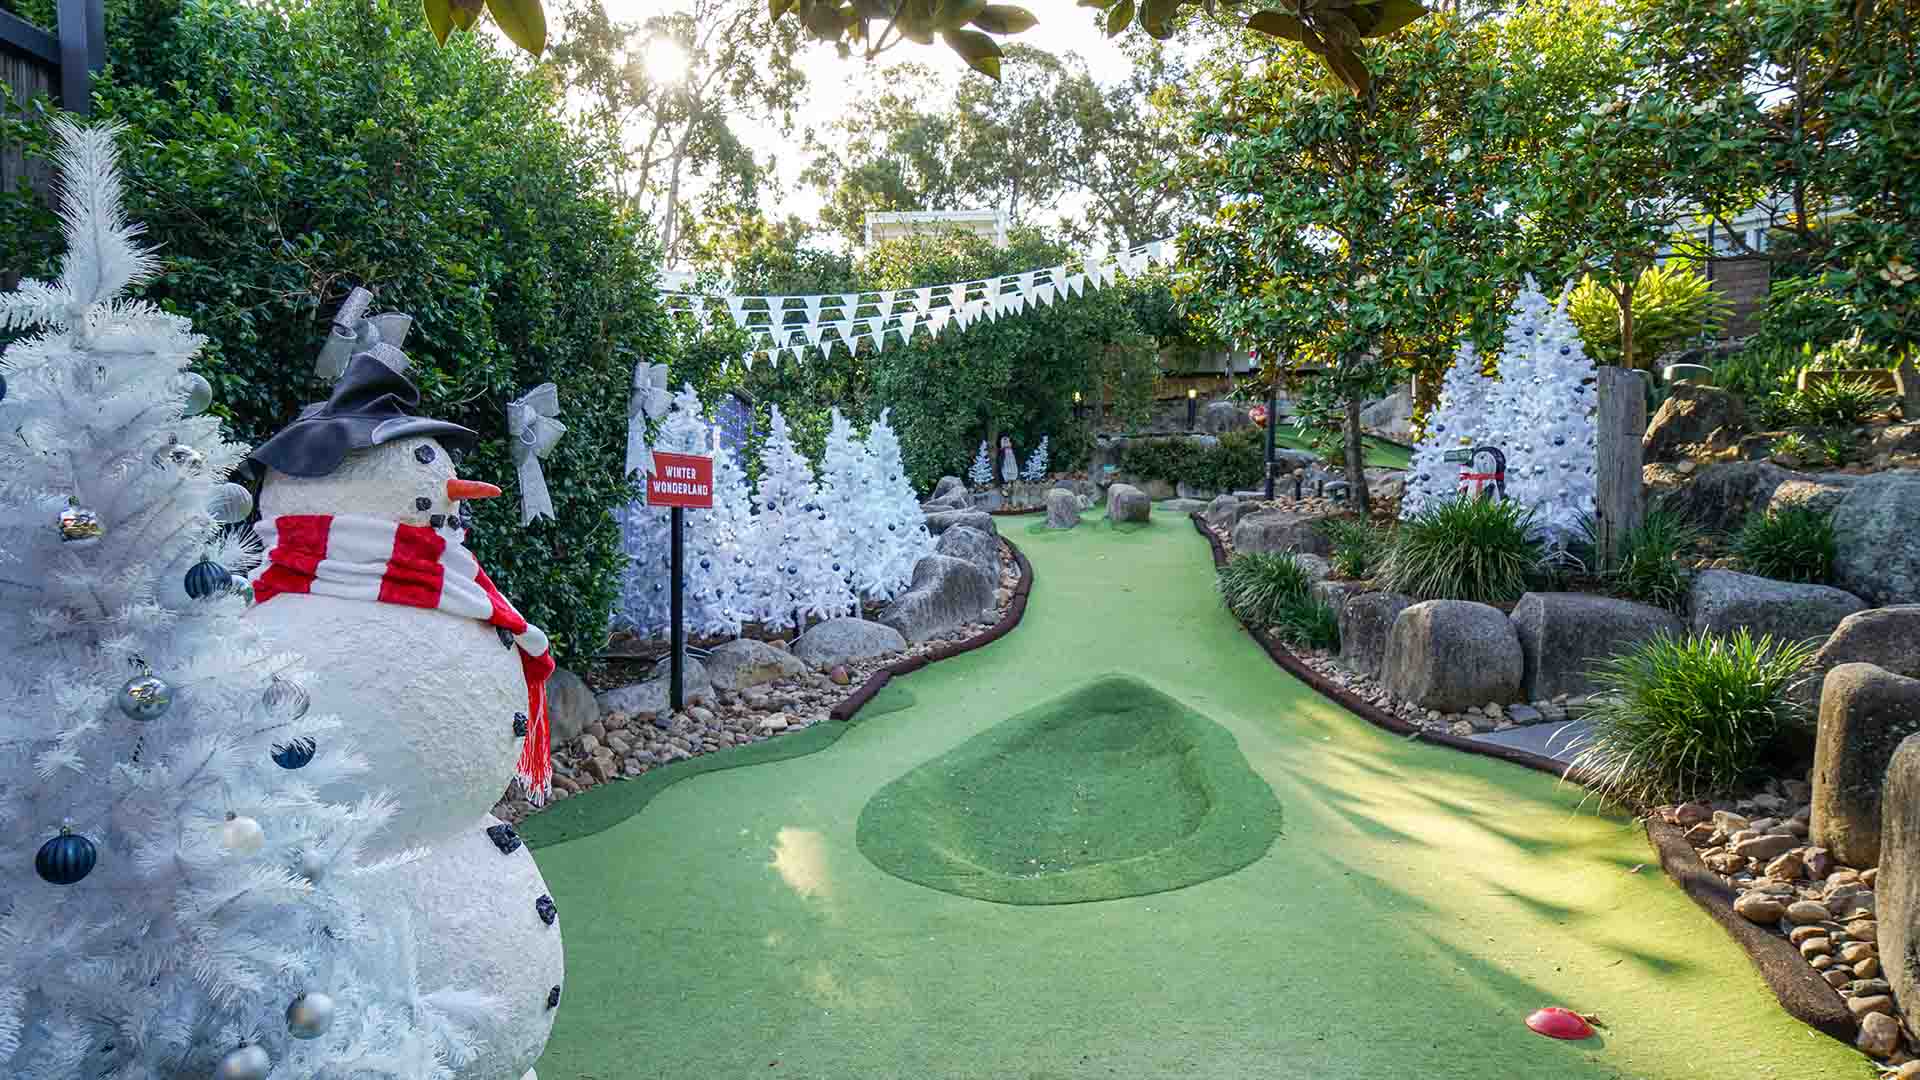 Victoria Park Is Bringing Back Its Christmas-Themed Mini Golf Course to Fill You Full of Festive Cheer